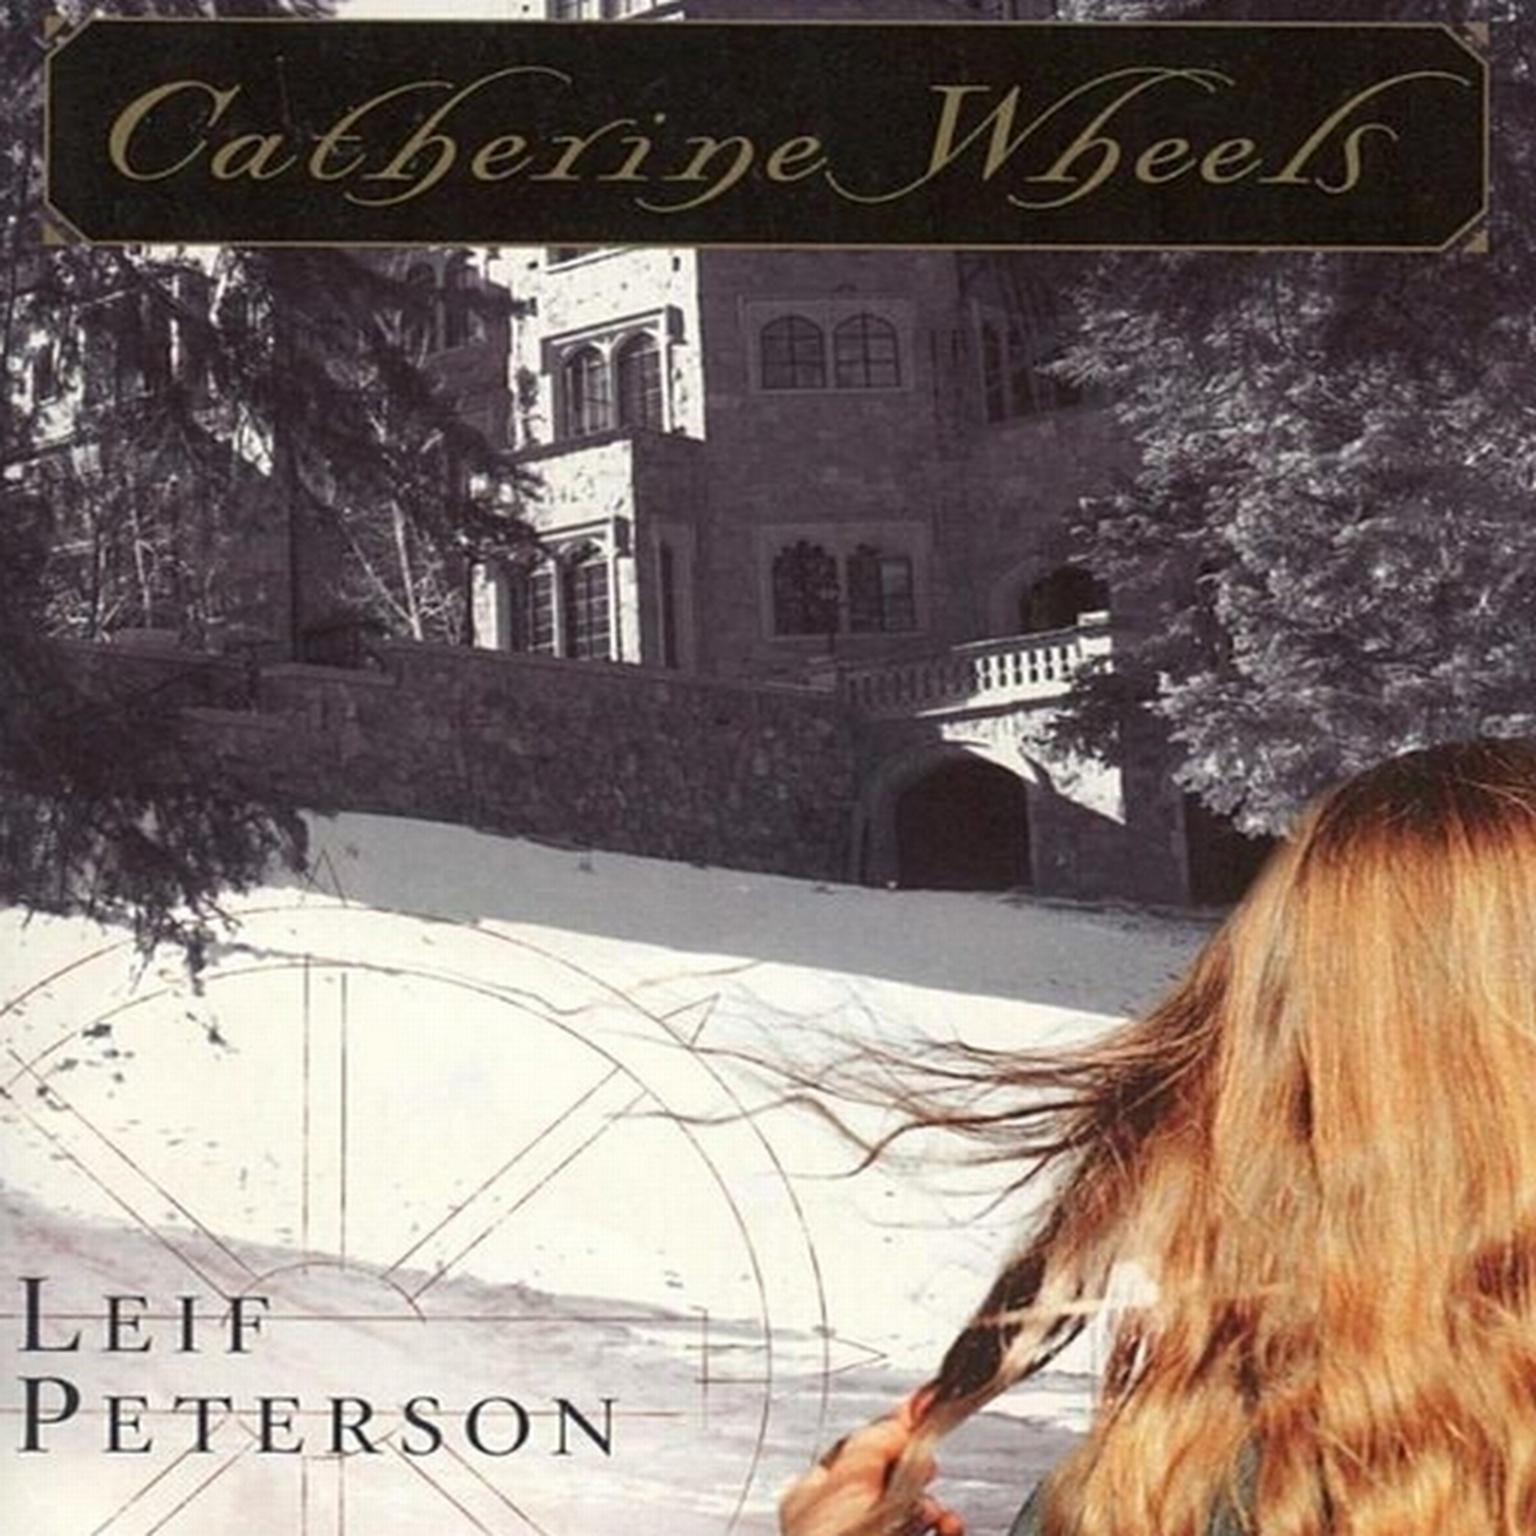 Catherine Wheels (Abridged) Audiobook, by Leif Peterson